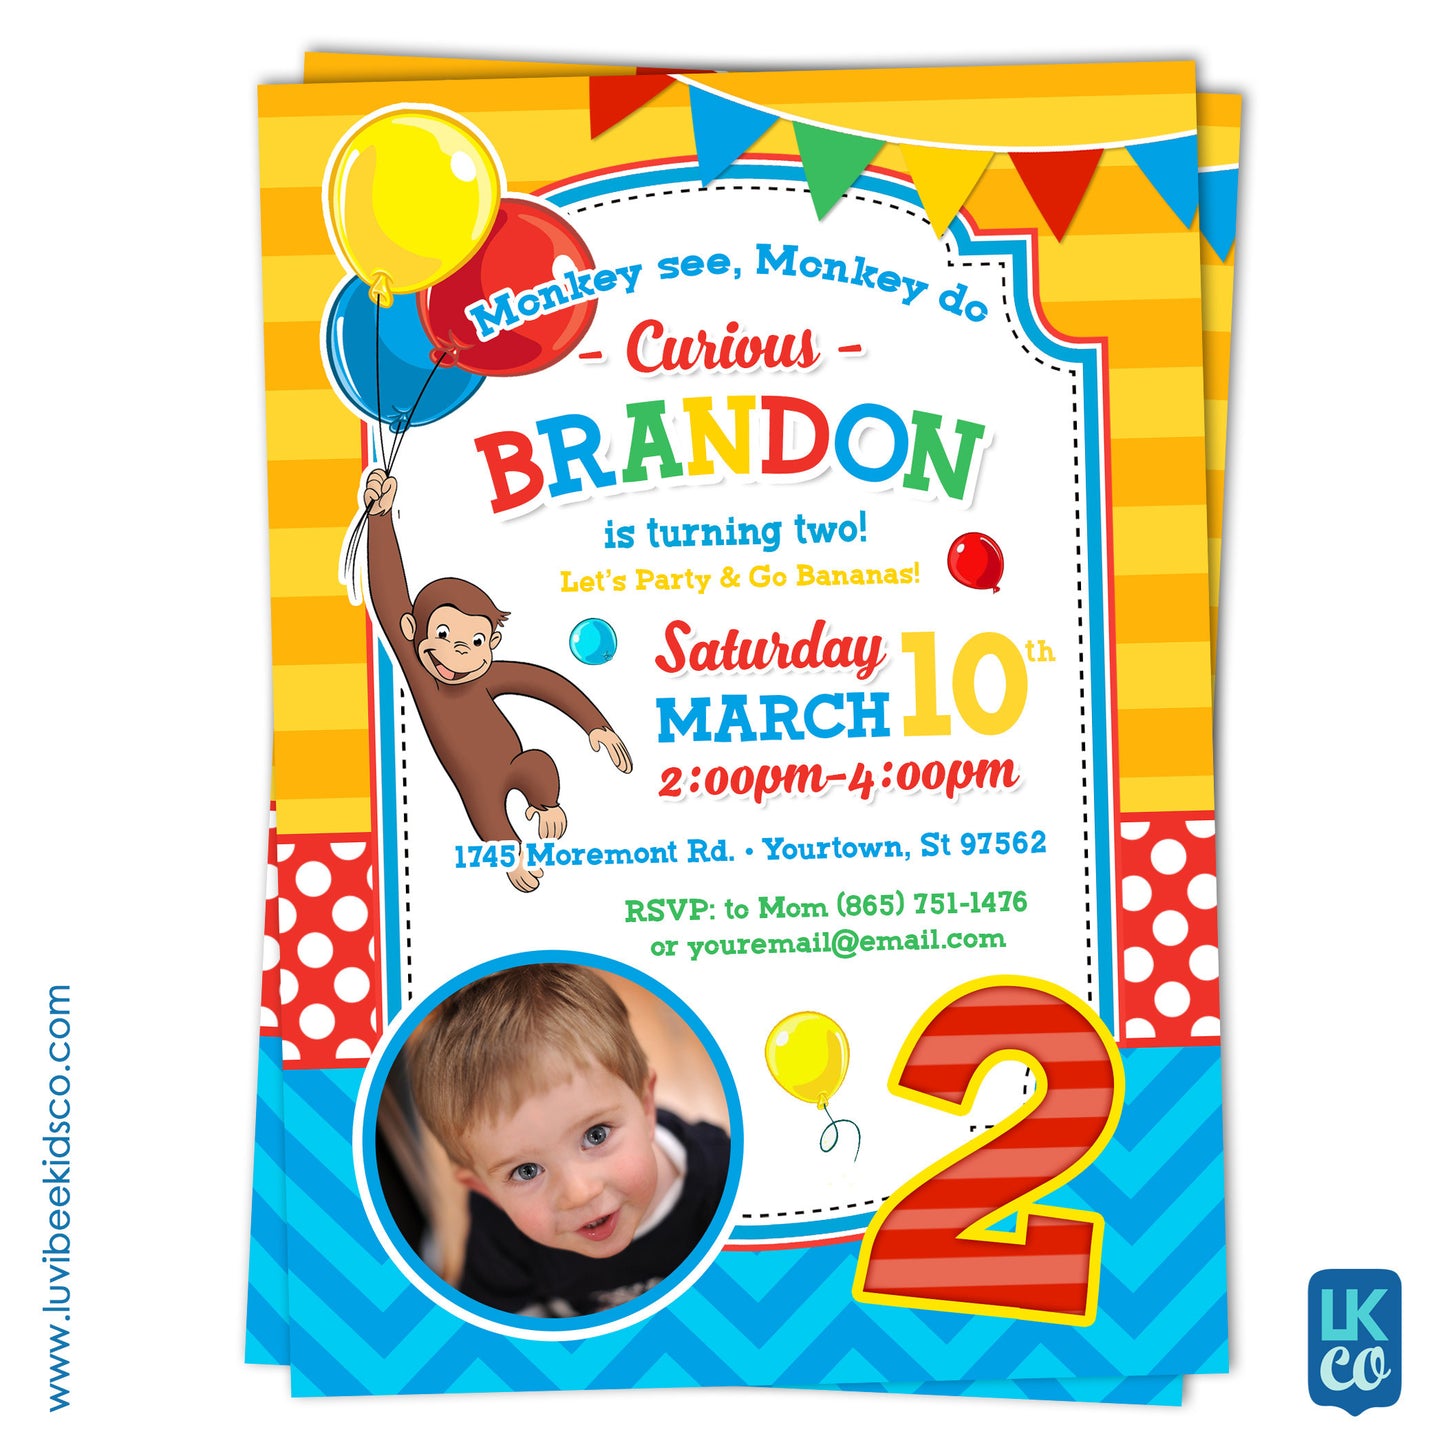 Curious George Invitation with Photo for Boy or Girl - Design 006 - LuvibeeKidsCo